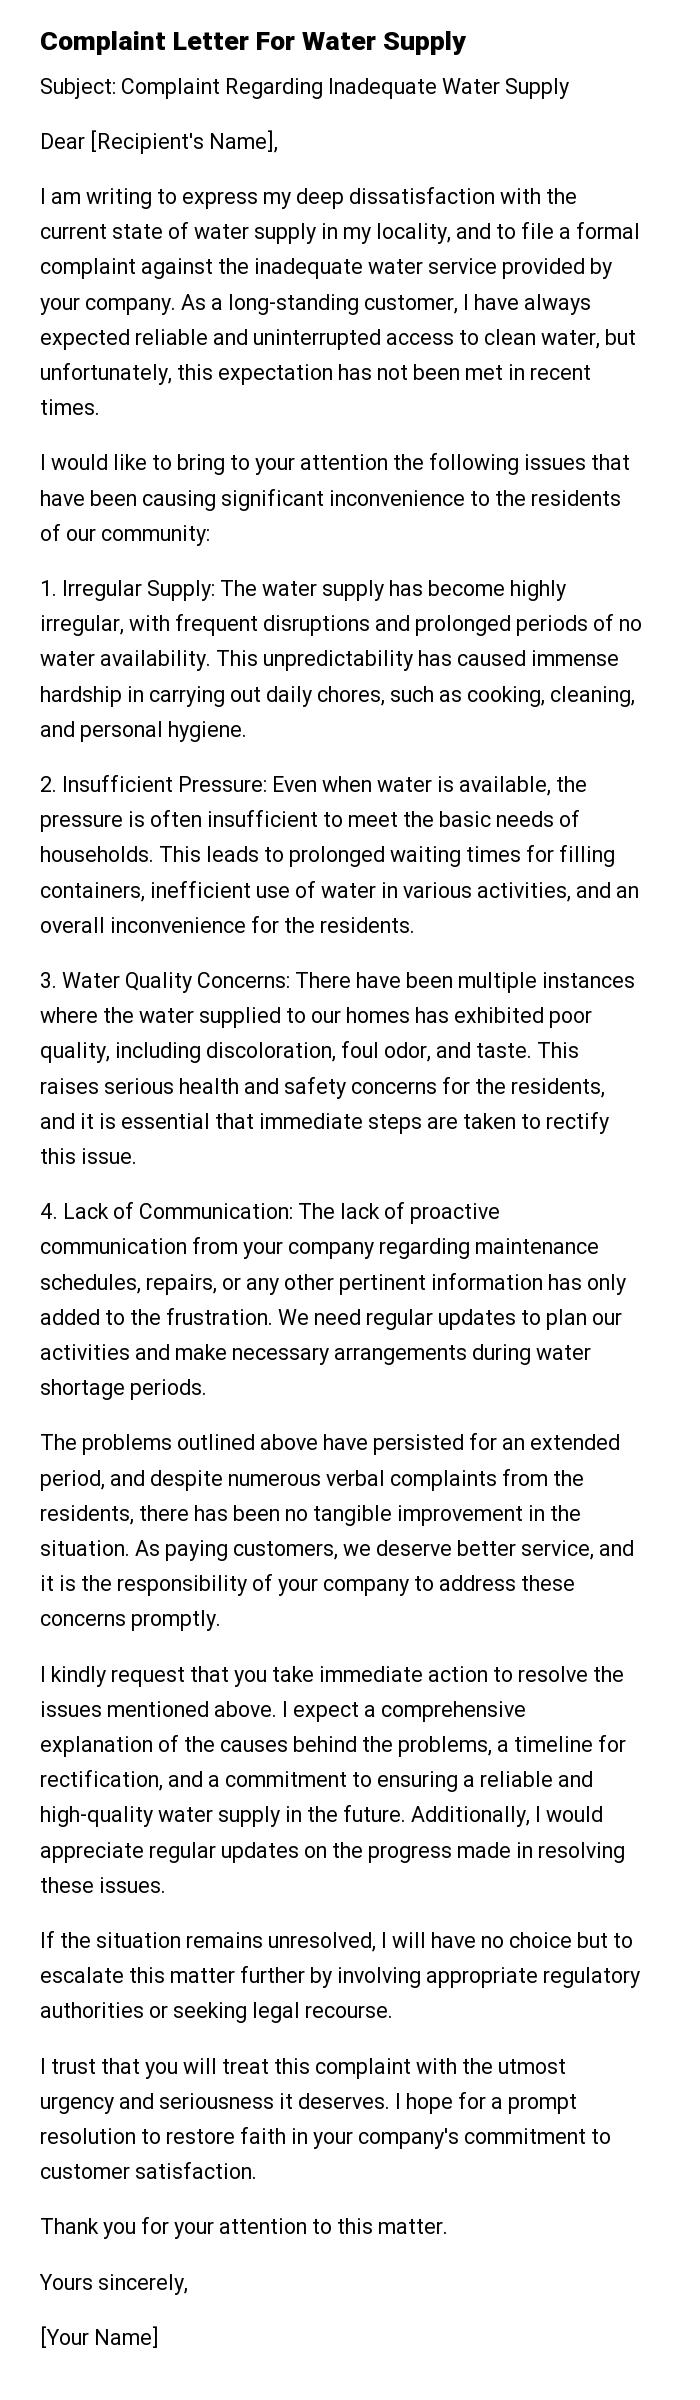 Complaint Letter For Water Supply